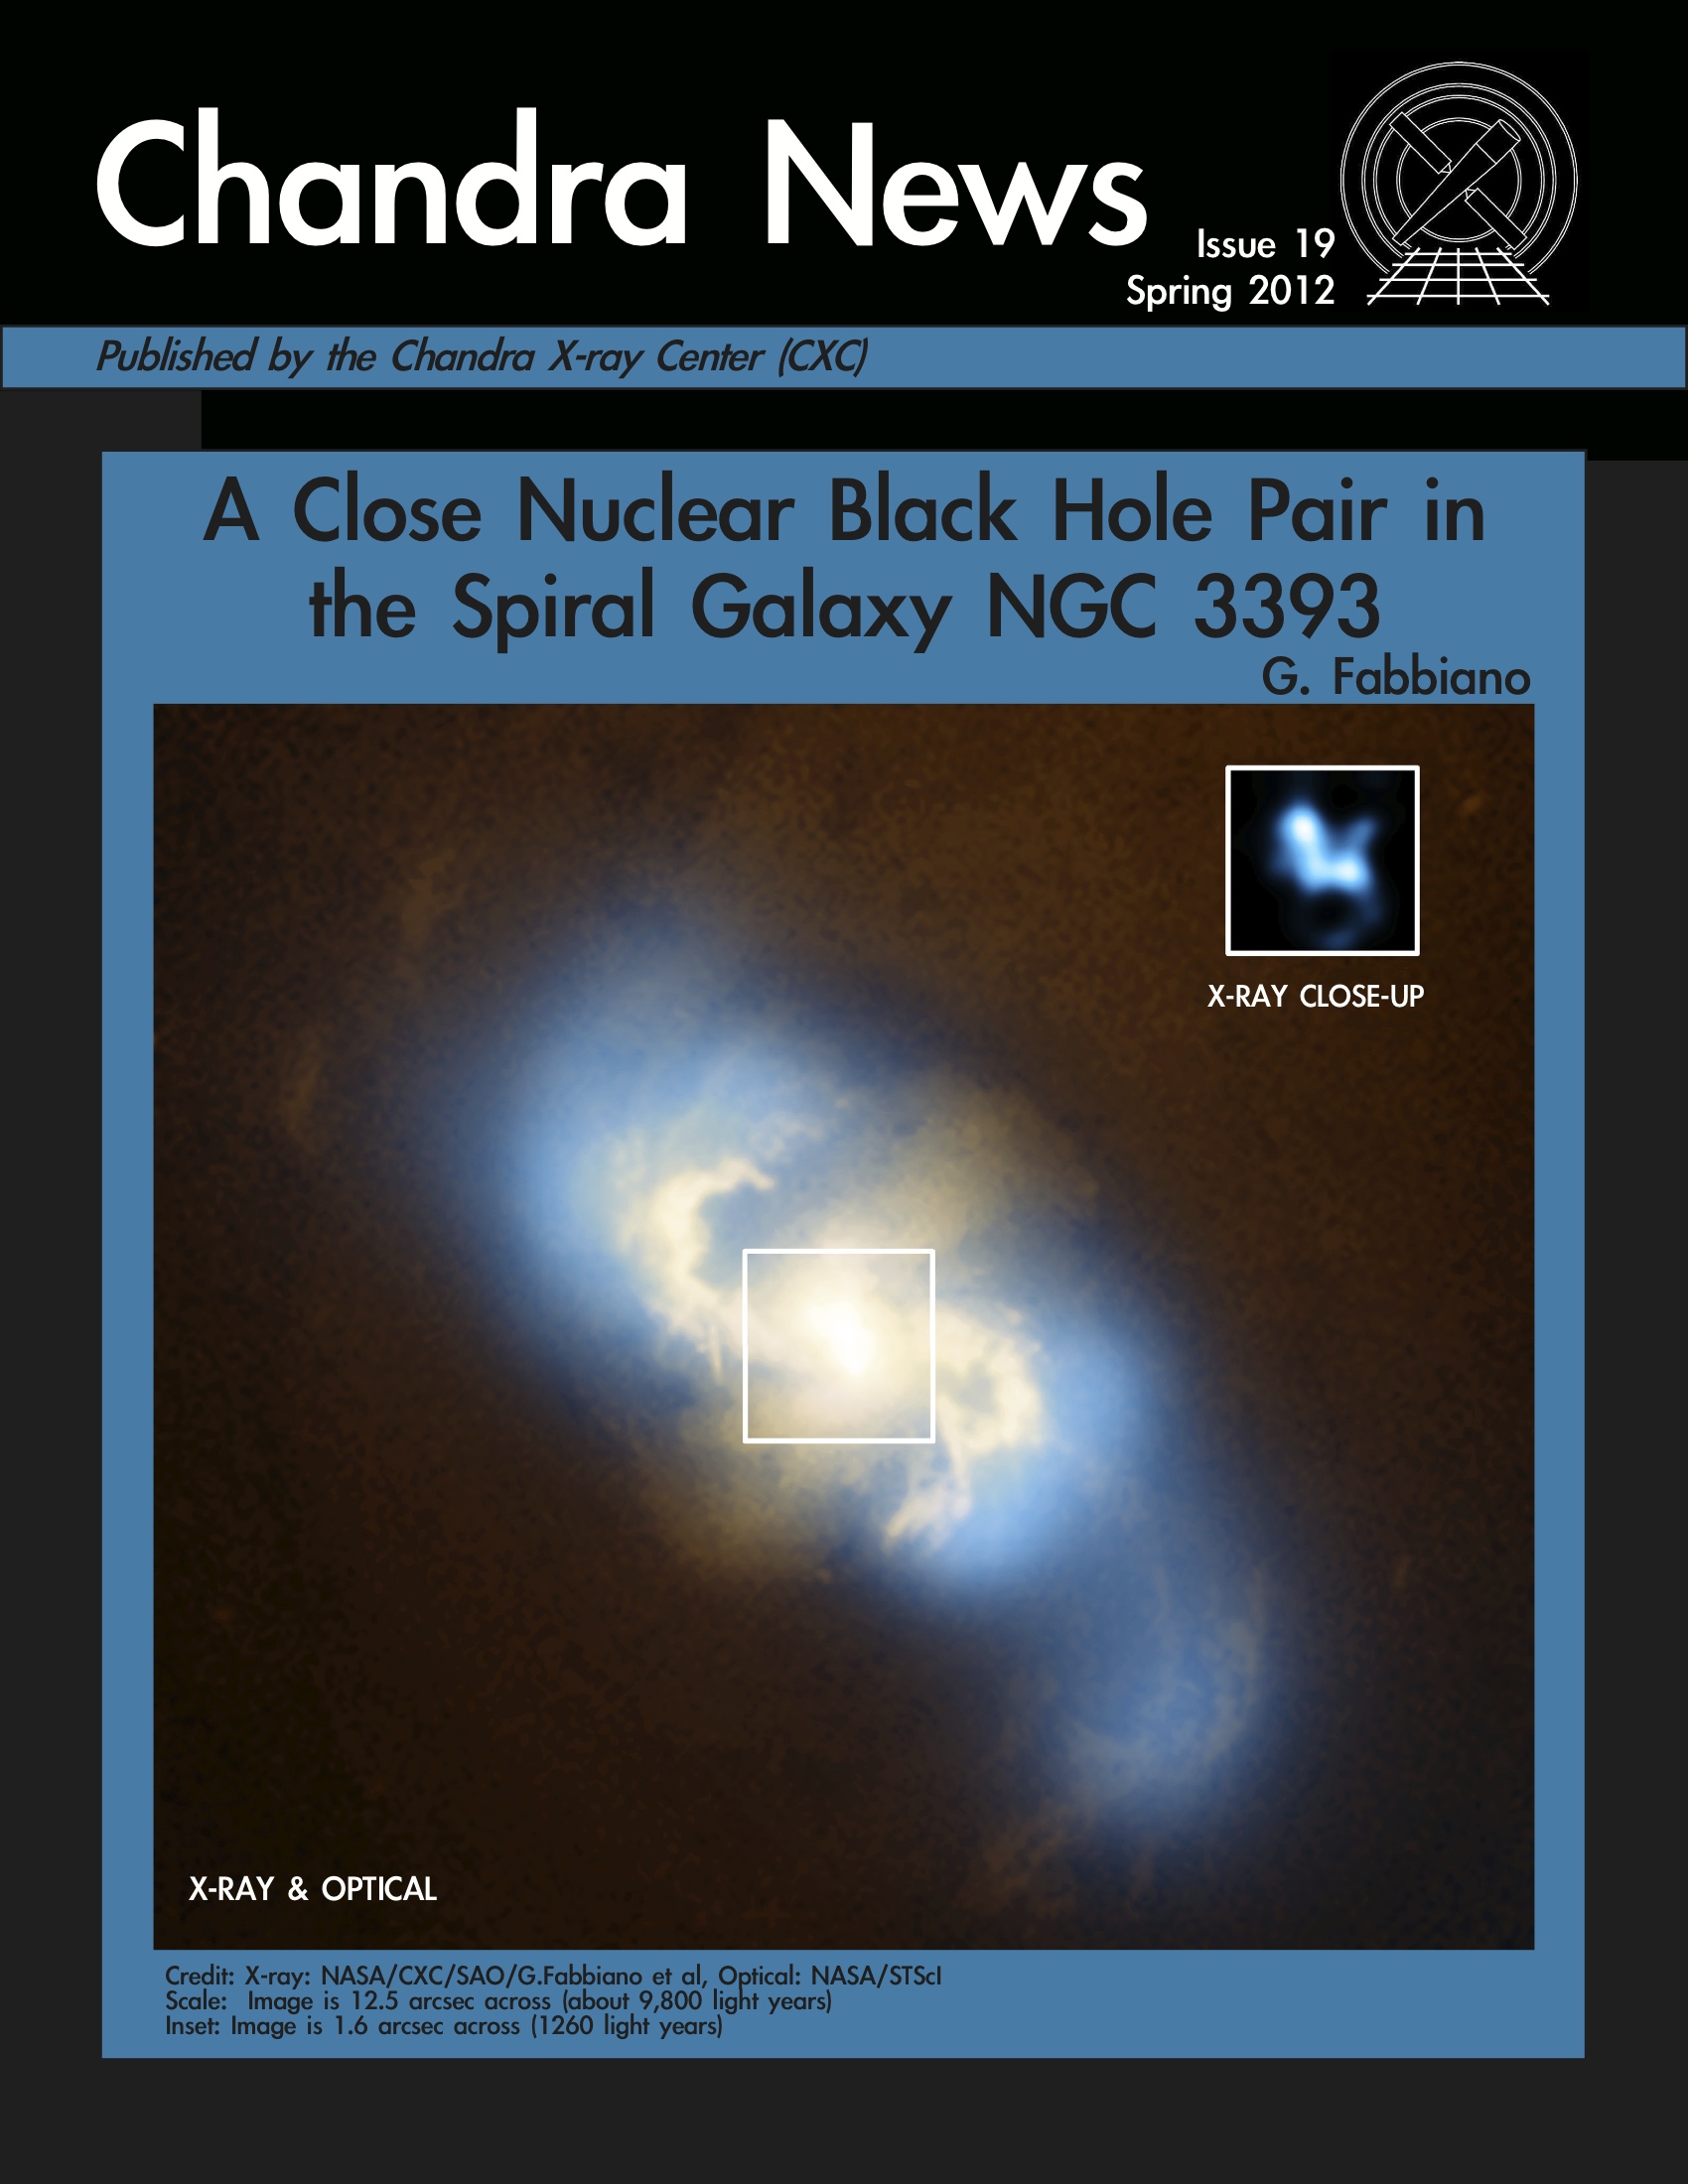 Cover of the Chandra Newsletter, issue 19.